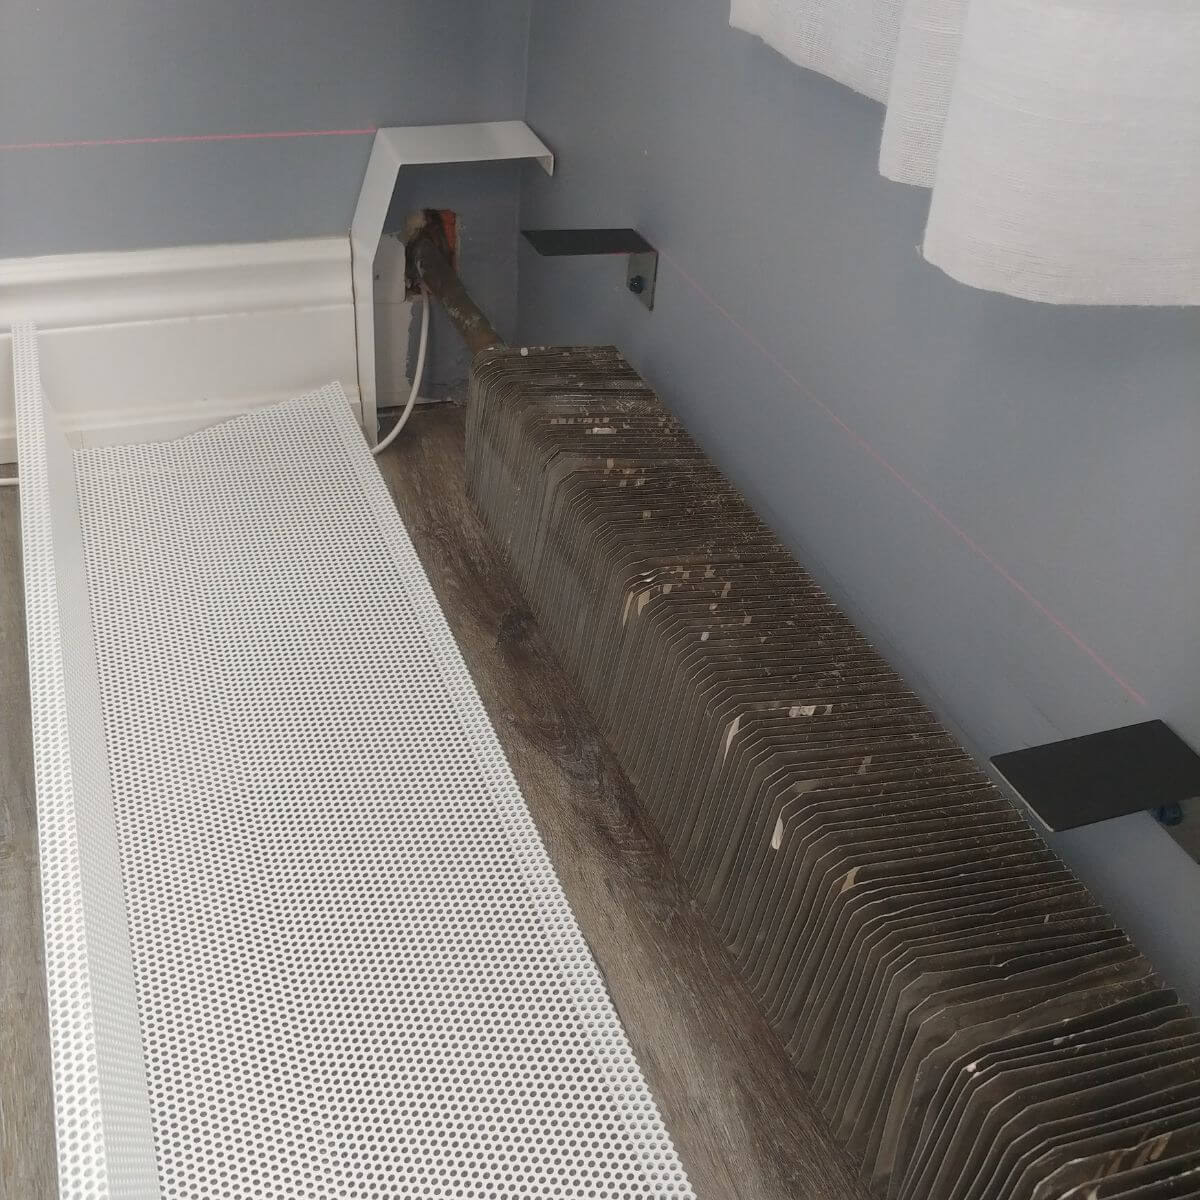 Milton water heater radiator cover installation before